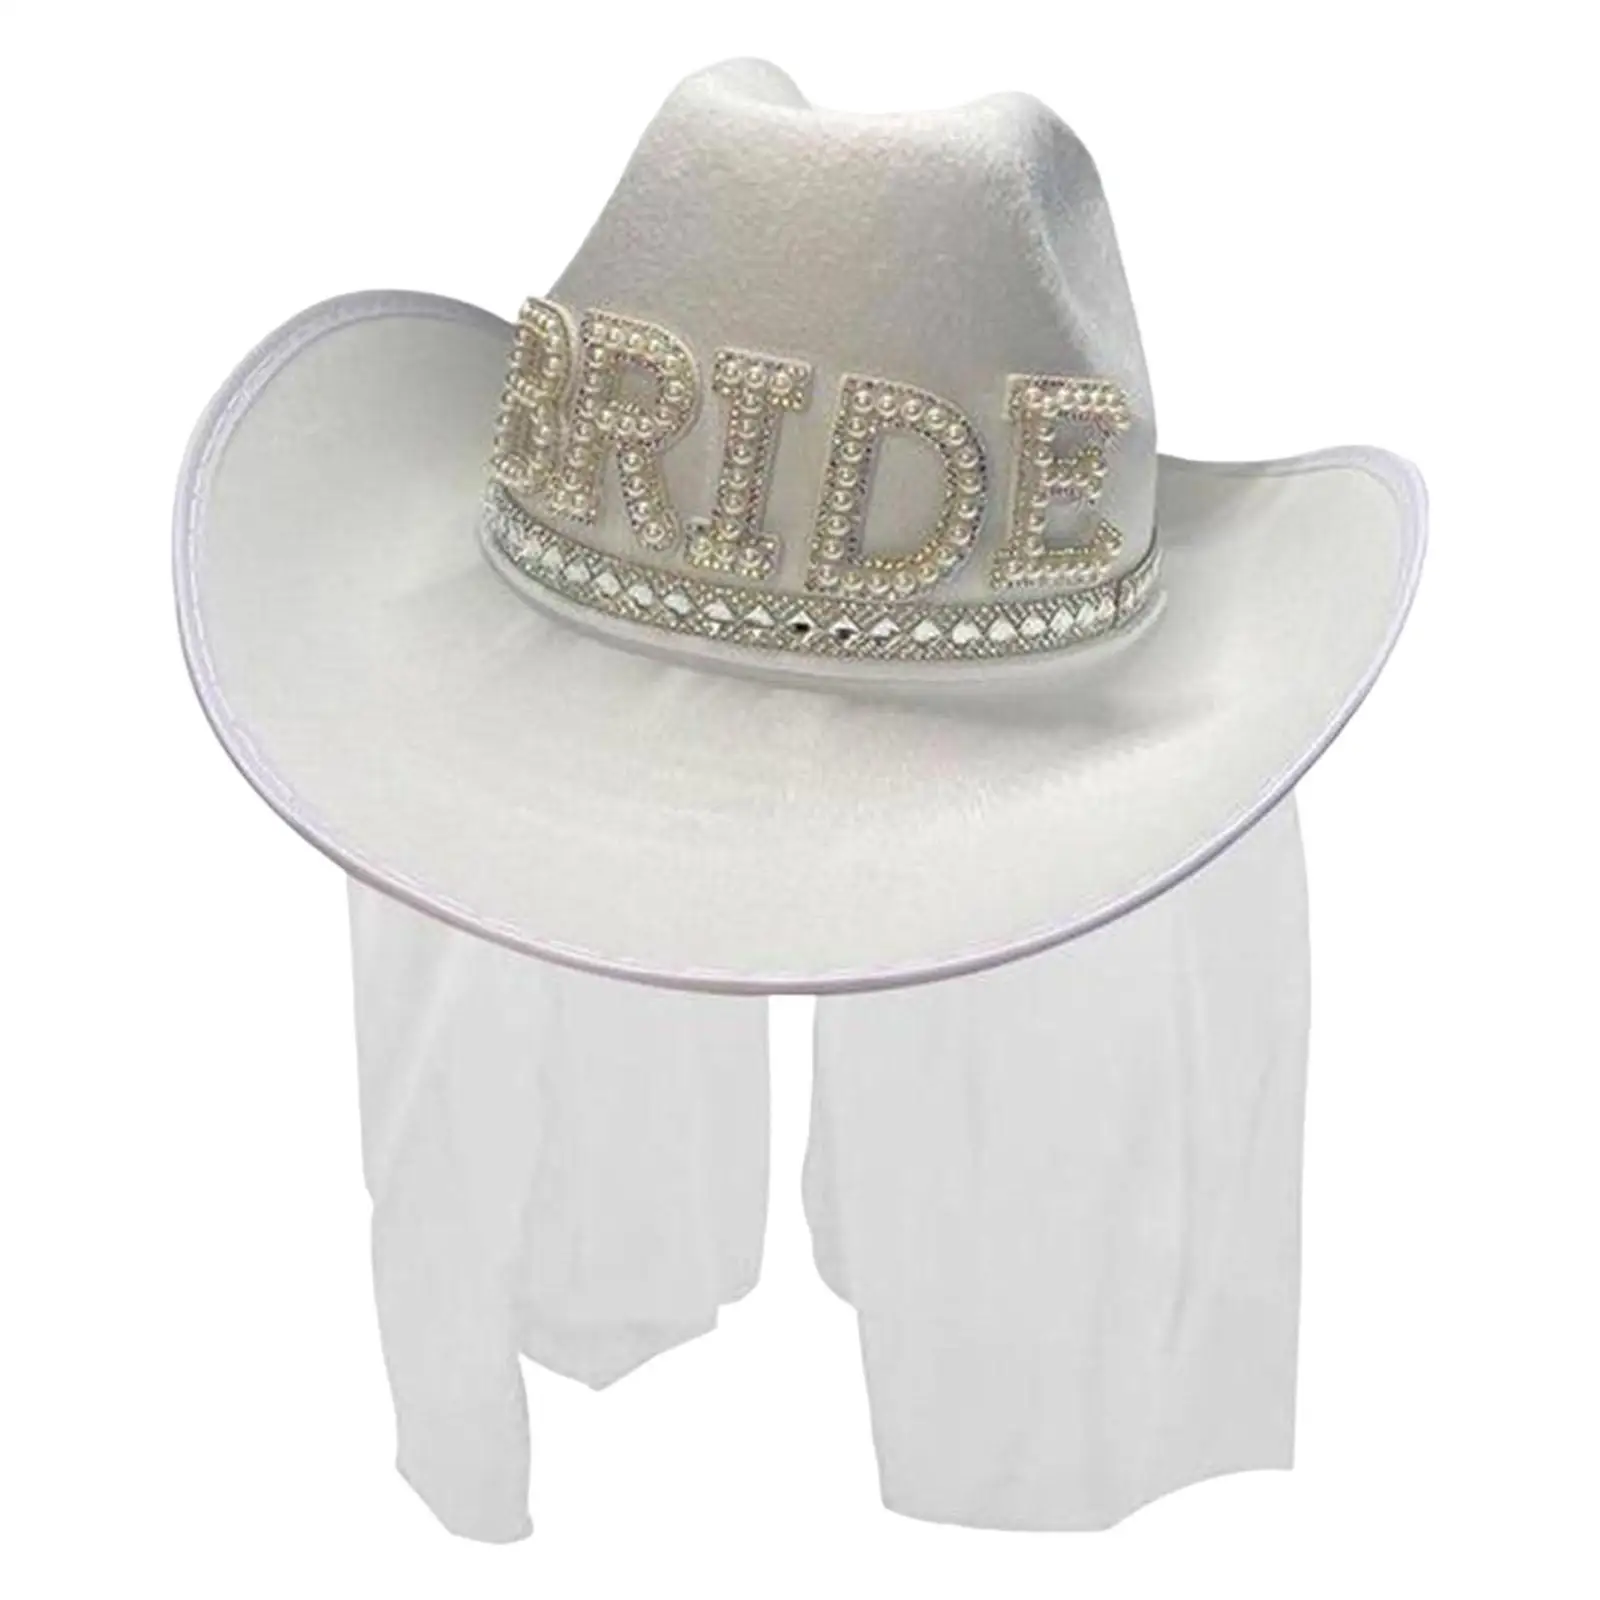 Wild West Pearl Bride Veil Cowboy Cowgirl Hat Costume Clothes White Dress up Sun Hats for Engagement Party Pretend Play Cocktail